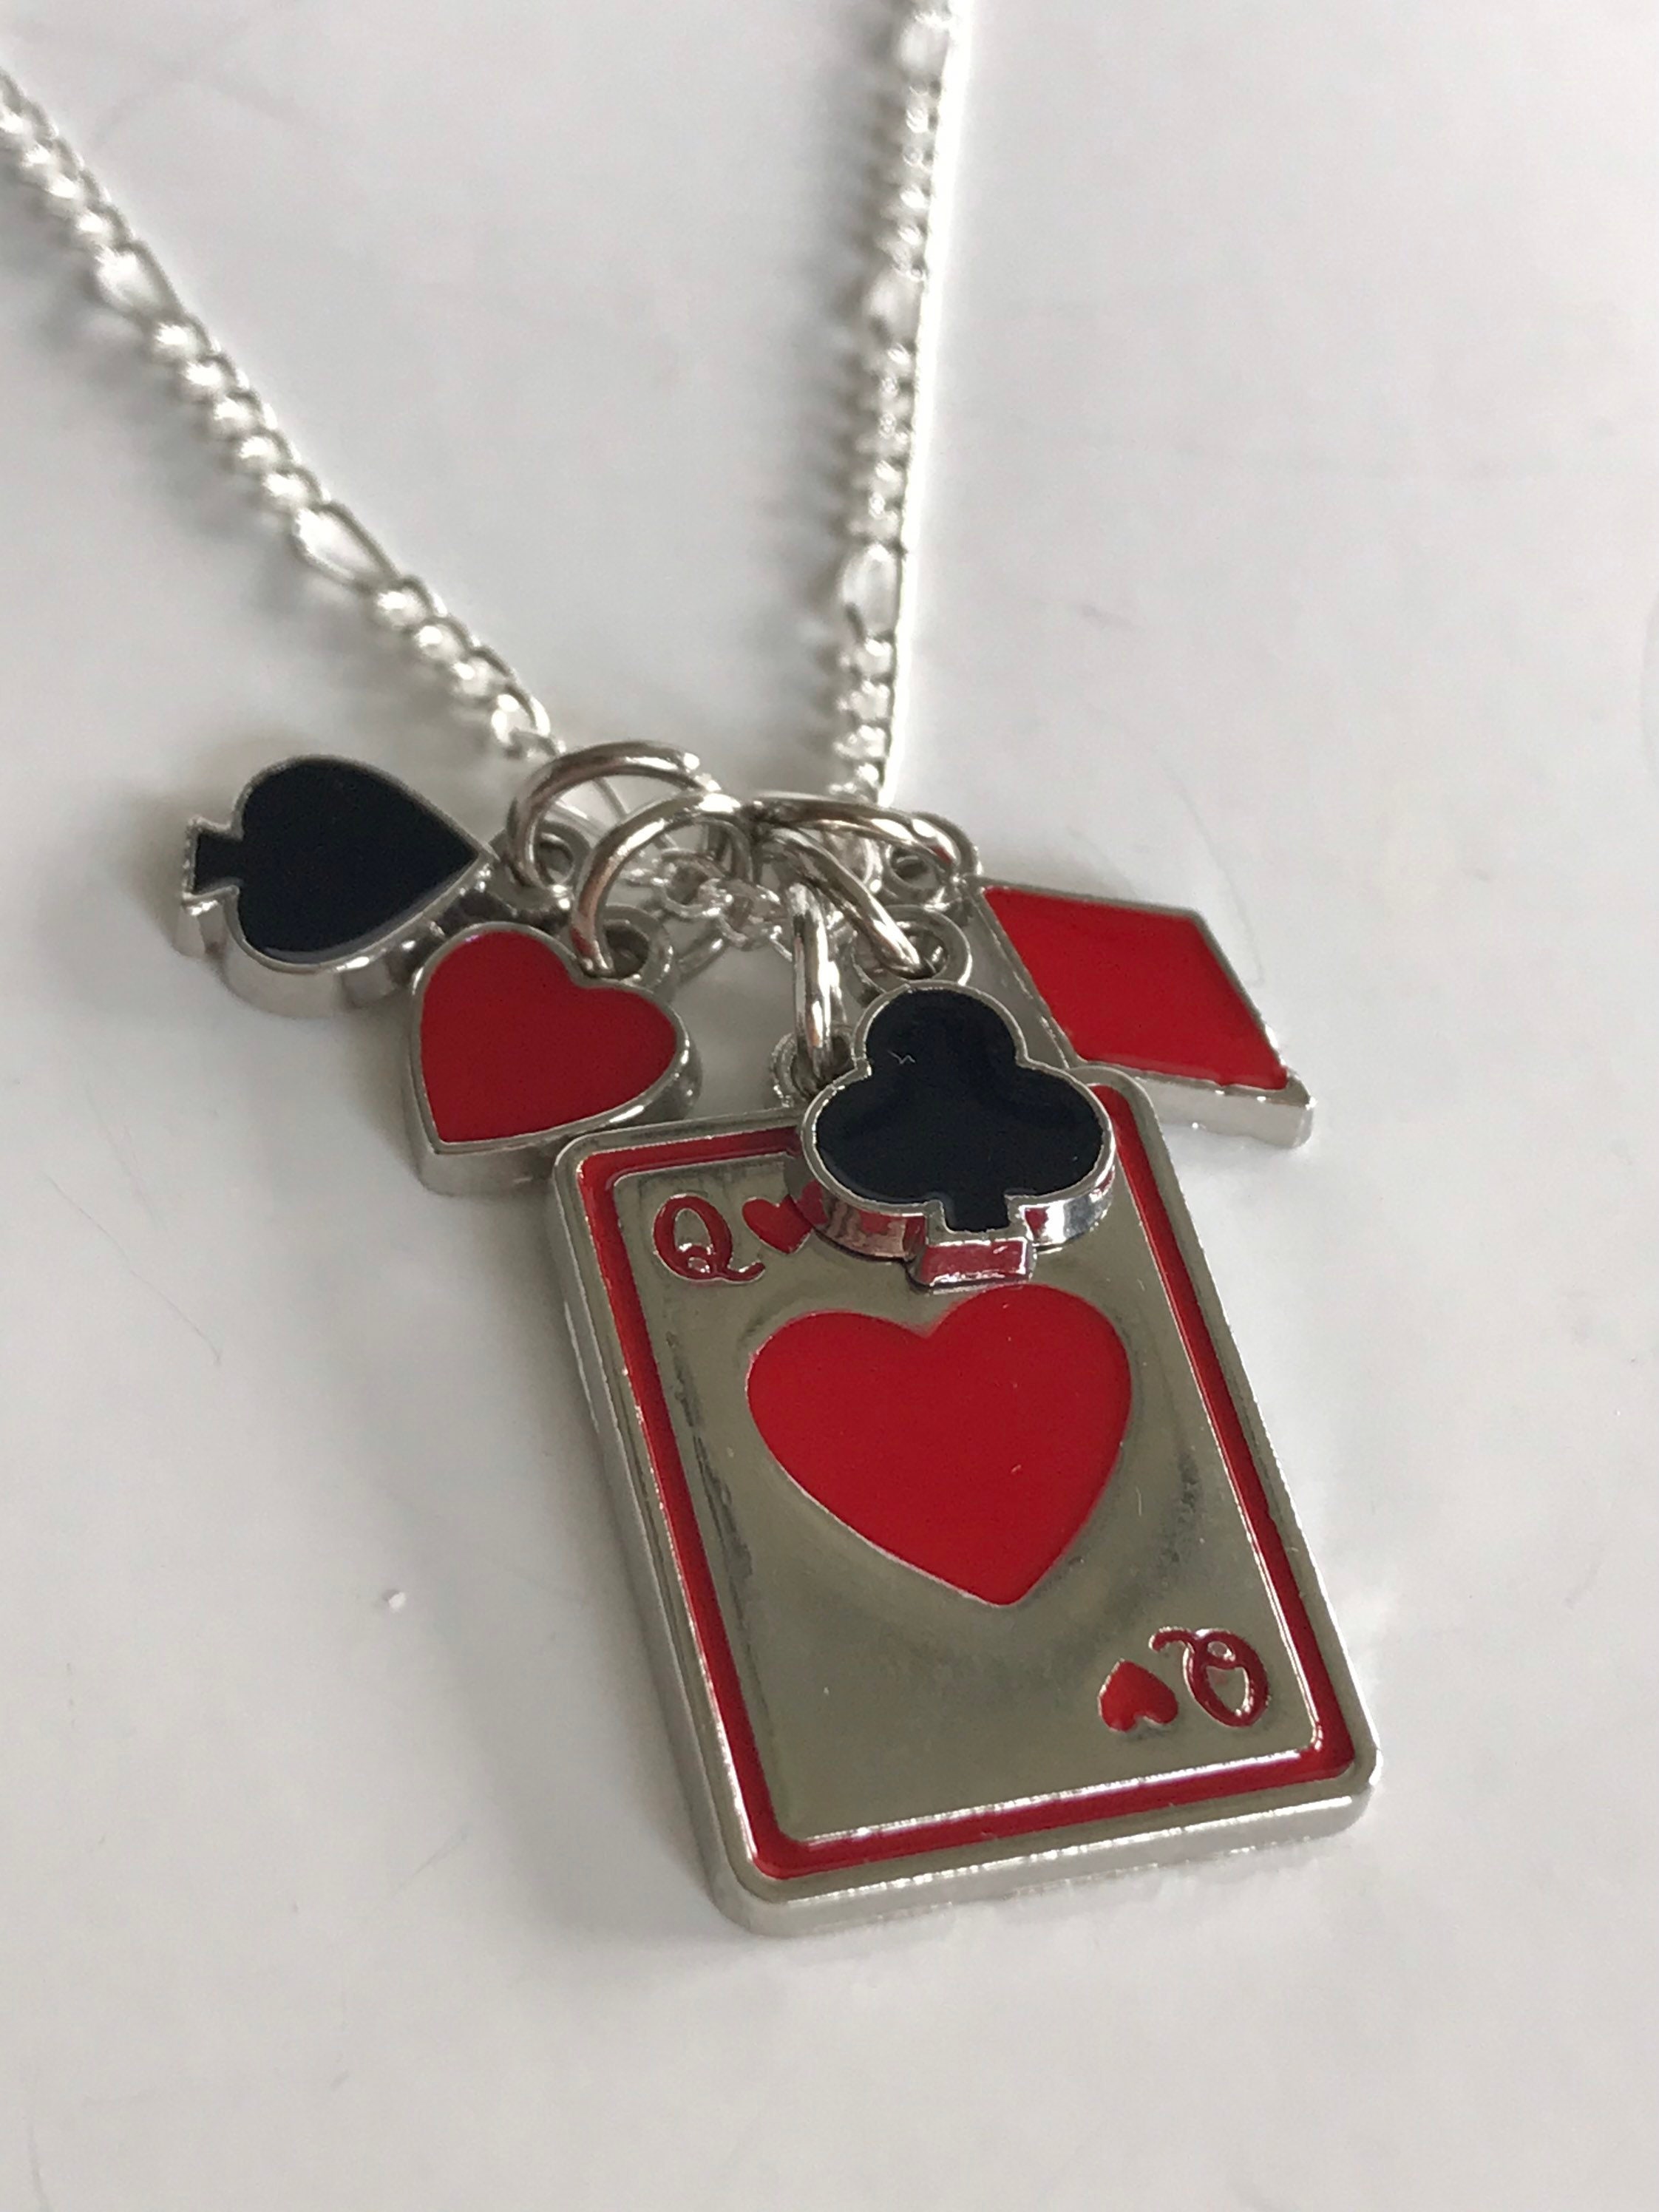  IDOXE Queen of Hearts Necklace 925 Sterling Silver Chain  January Birthstone Red Heart Toy Princess Halloween Accessories Jewelry  Valentine's Gift for Her (Red January): Clothing, Shoes & Jewelry